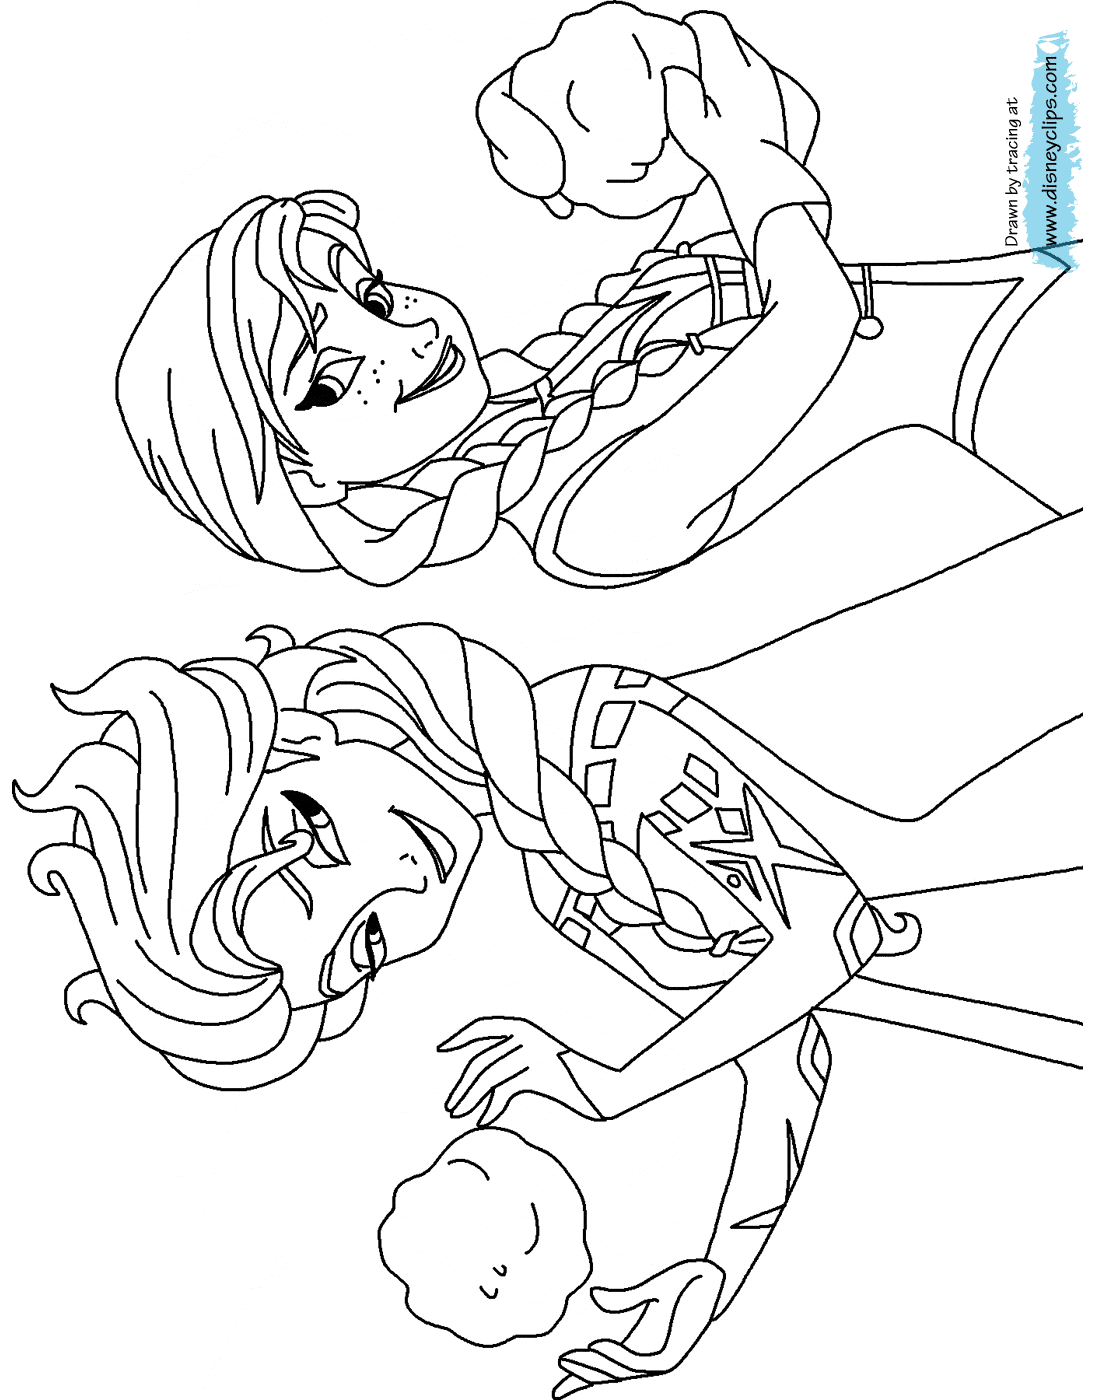 frozen characters coloring pages coloring pages frozen coloring pages free and printable characters pages frozen coloring 